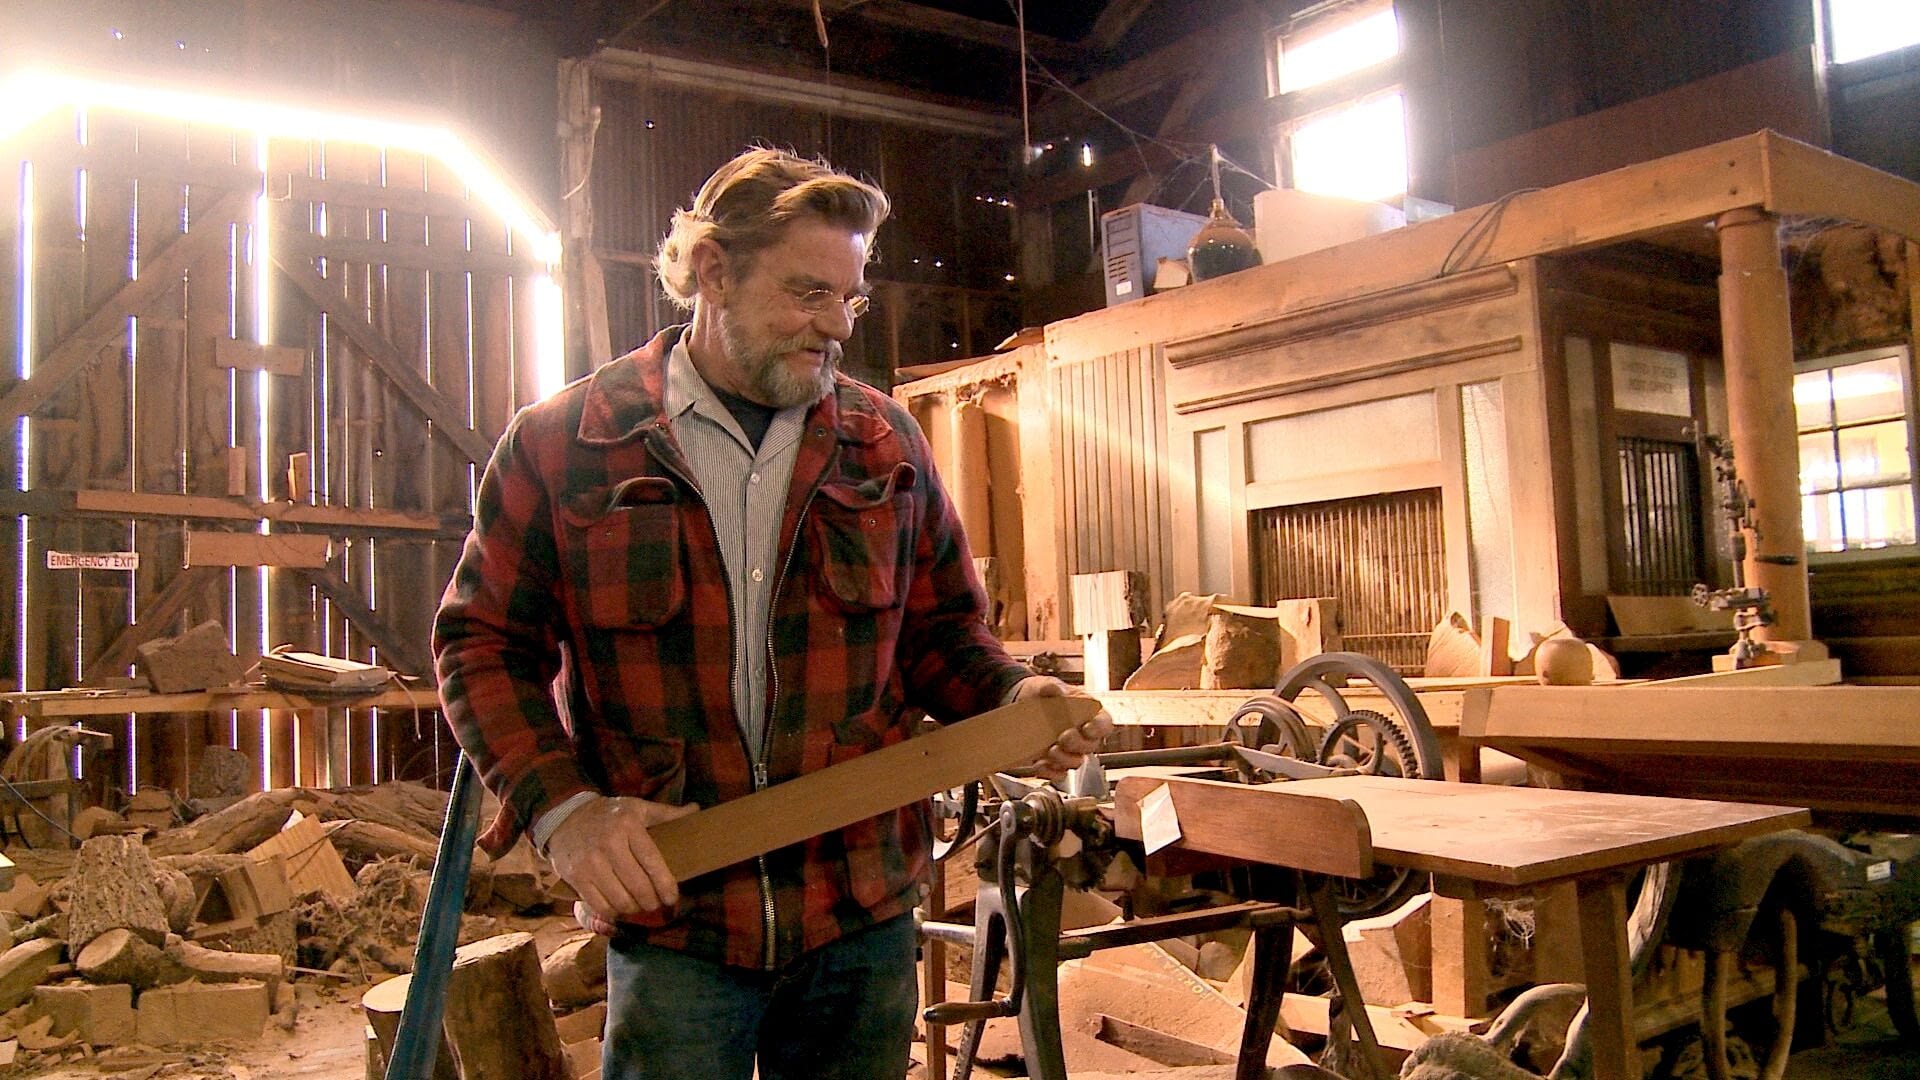 Image: Blue Ox Millworks founder Eric Hollenbeck in his wood shop